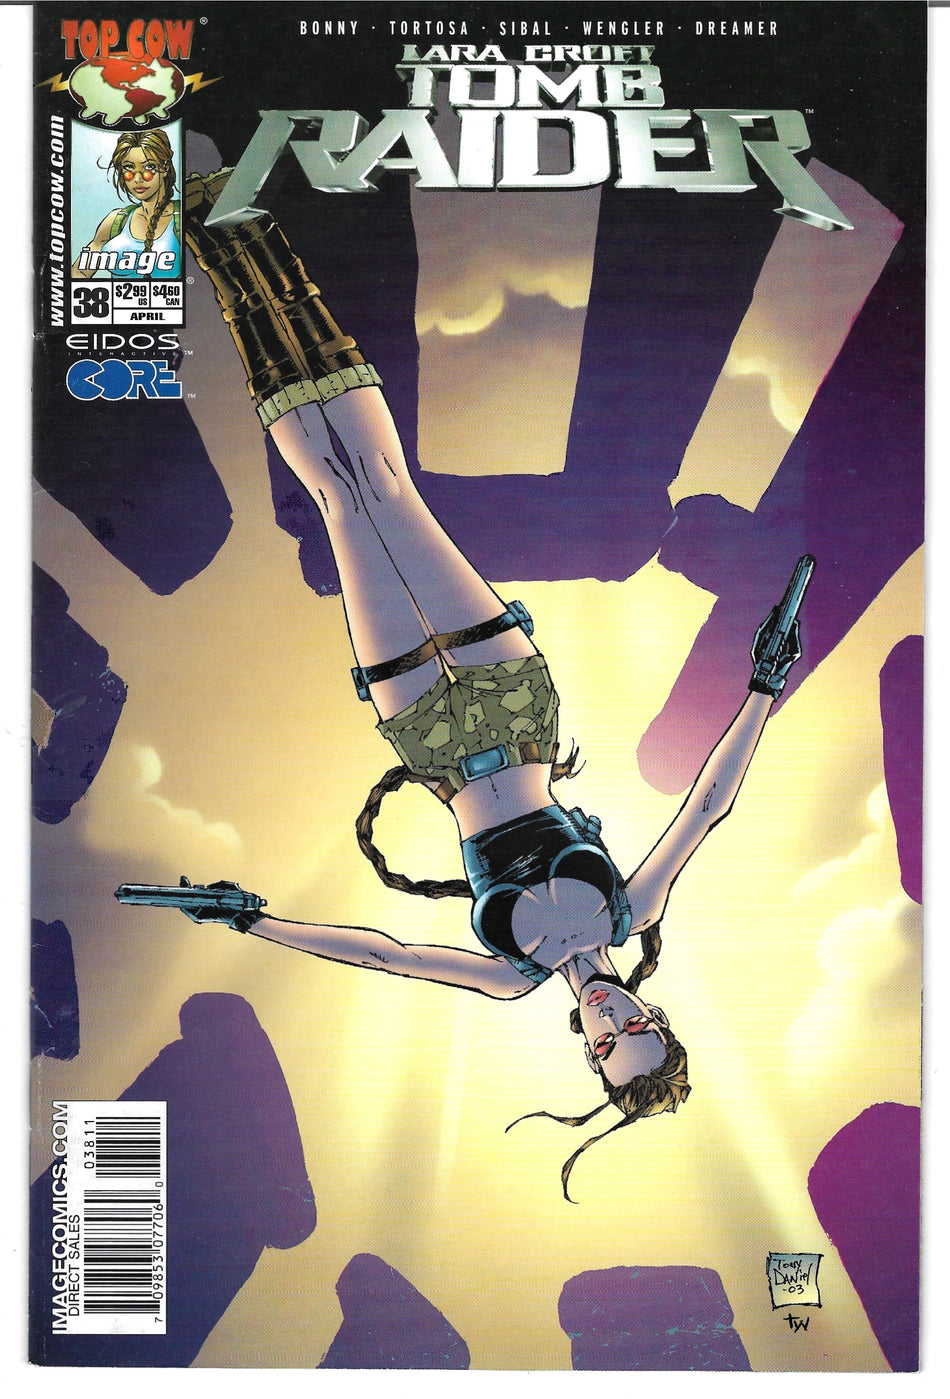 Photo of Tomb Raider Issue 38 comic Sold by Stronghold Collectibles